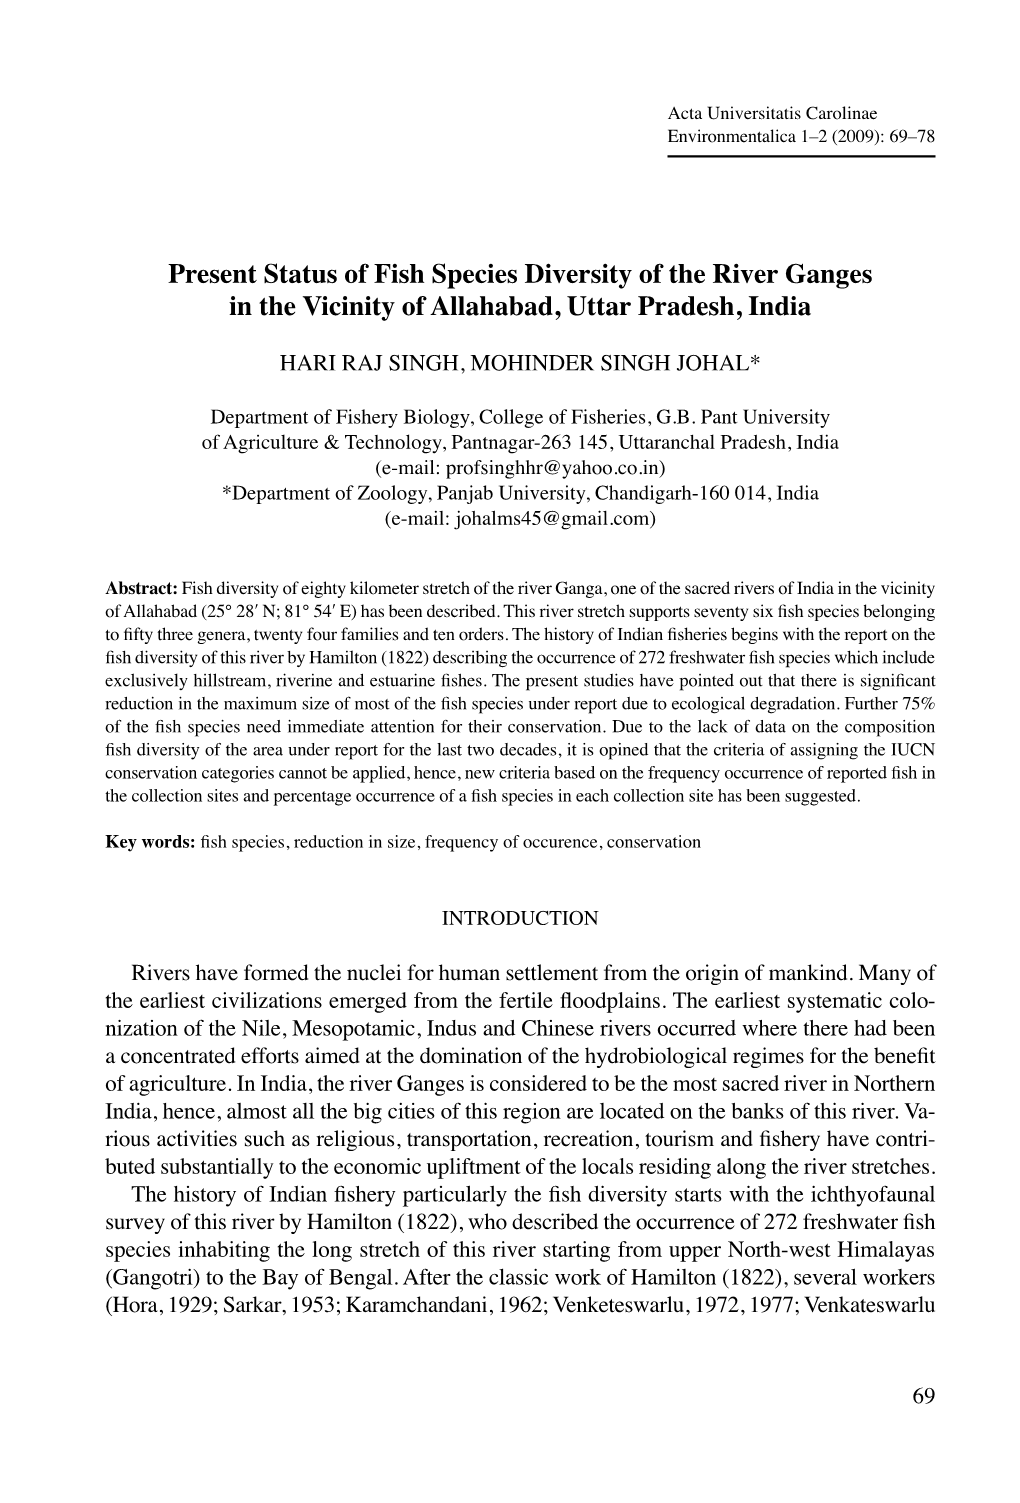 Present Status of Fish Species Diversity of the River Ganges in the Vicinity of Allahabad, Uttar Pradesh, India